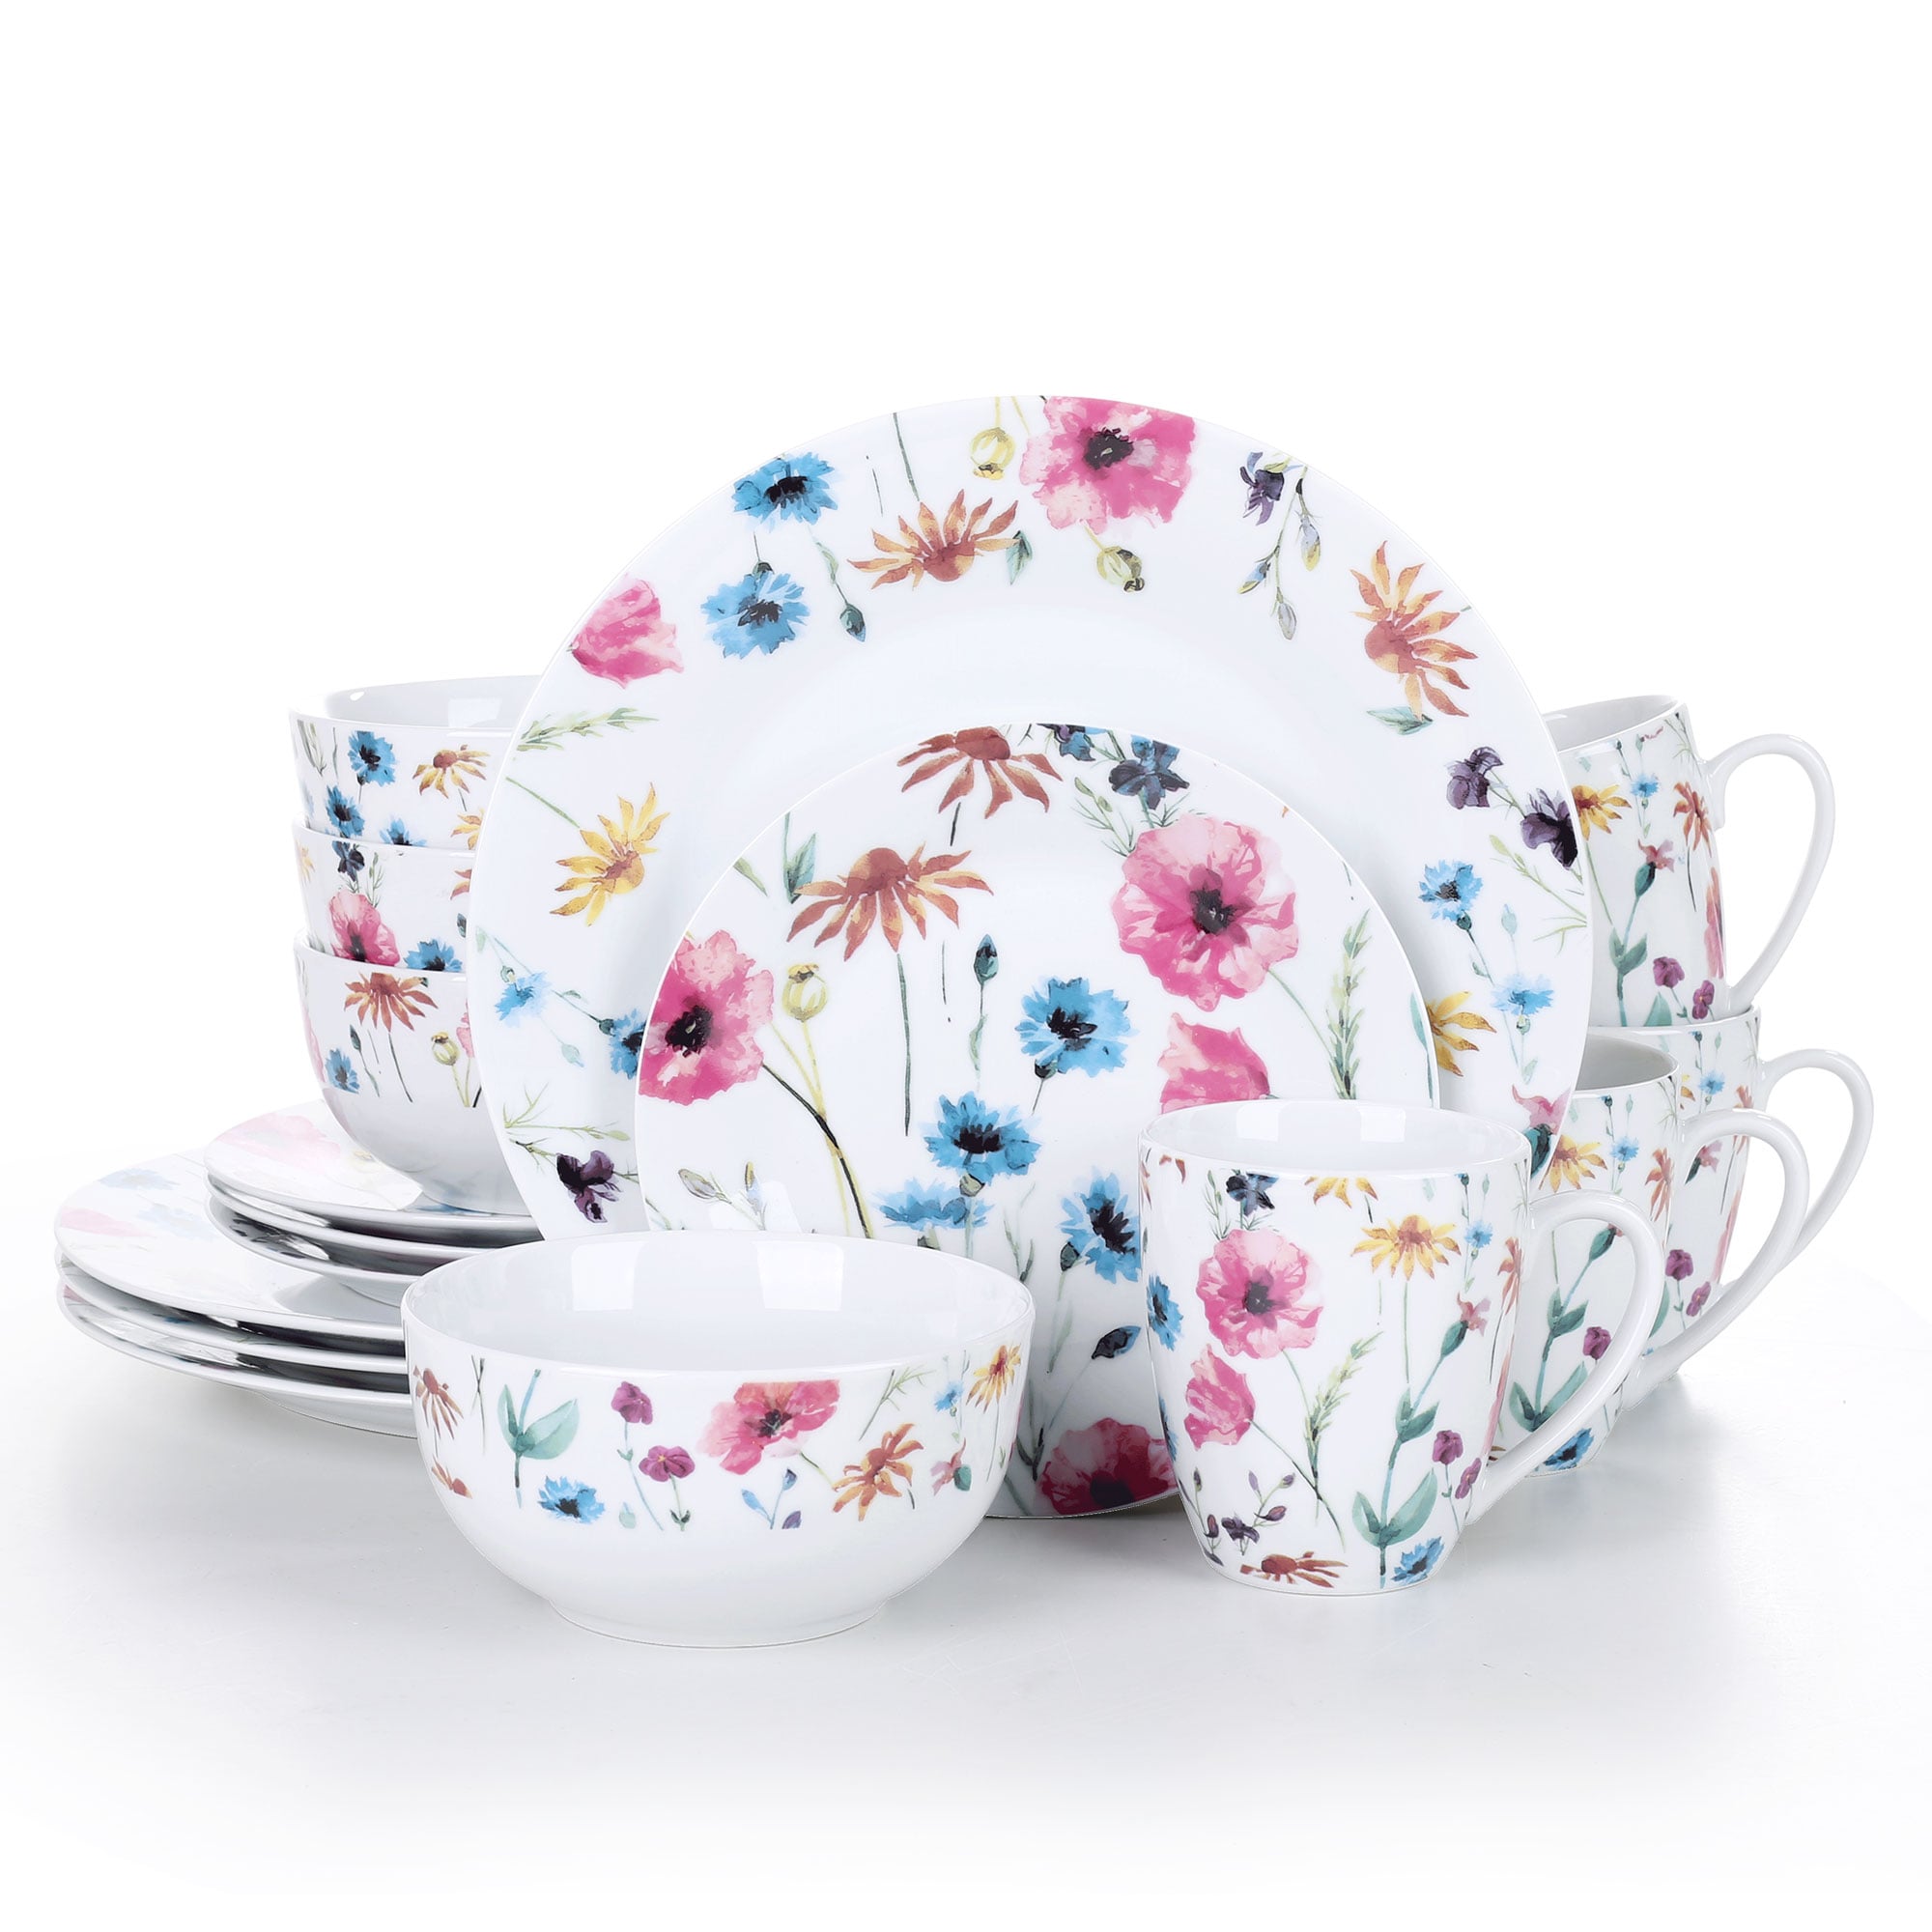 VEWEET, Series Annie, Porcelain Dinnerware Sets for 6, White Dish Set with  Pink Floral, 30 PCS Dinner Sets Including Dinner Plates, Dessert Plates